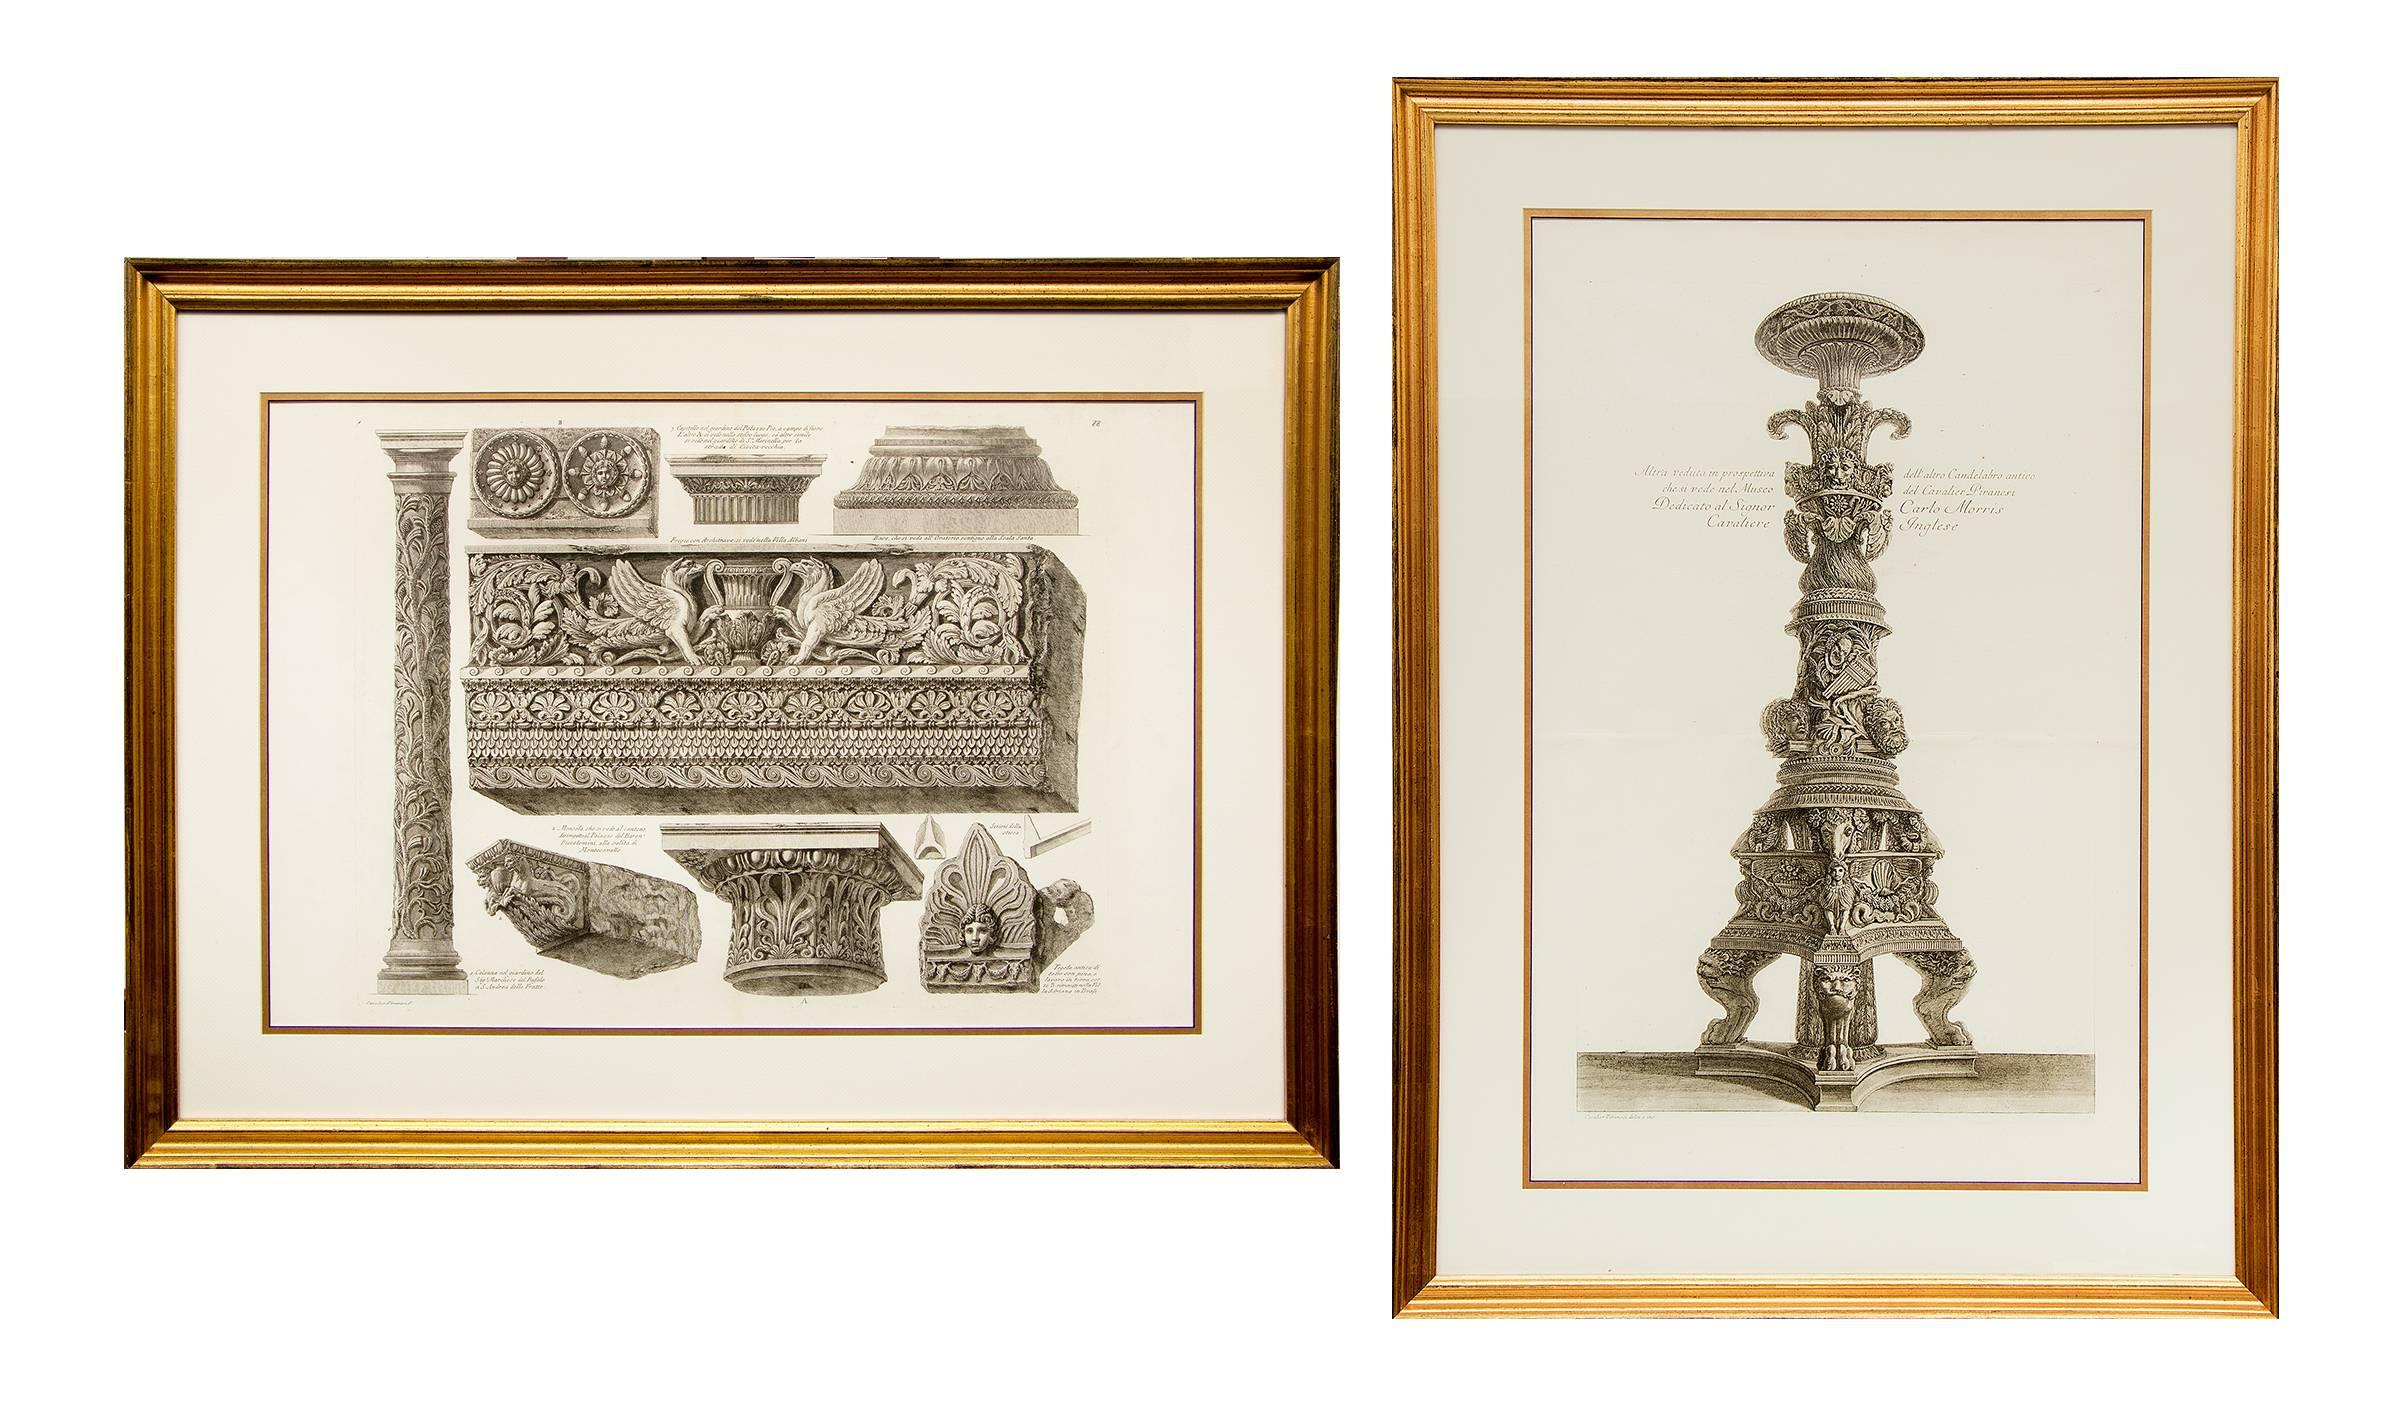 Pair of 19th Century Etchings: Ornamental Frieze & Ancient Candelabra